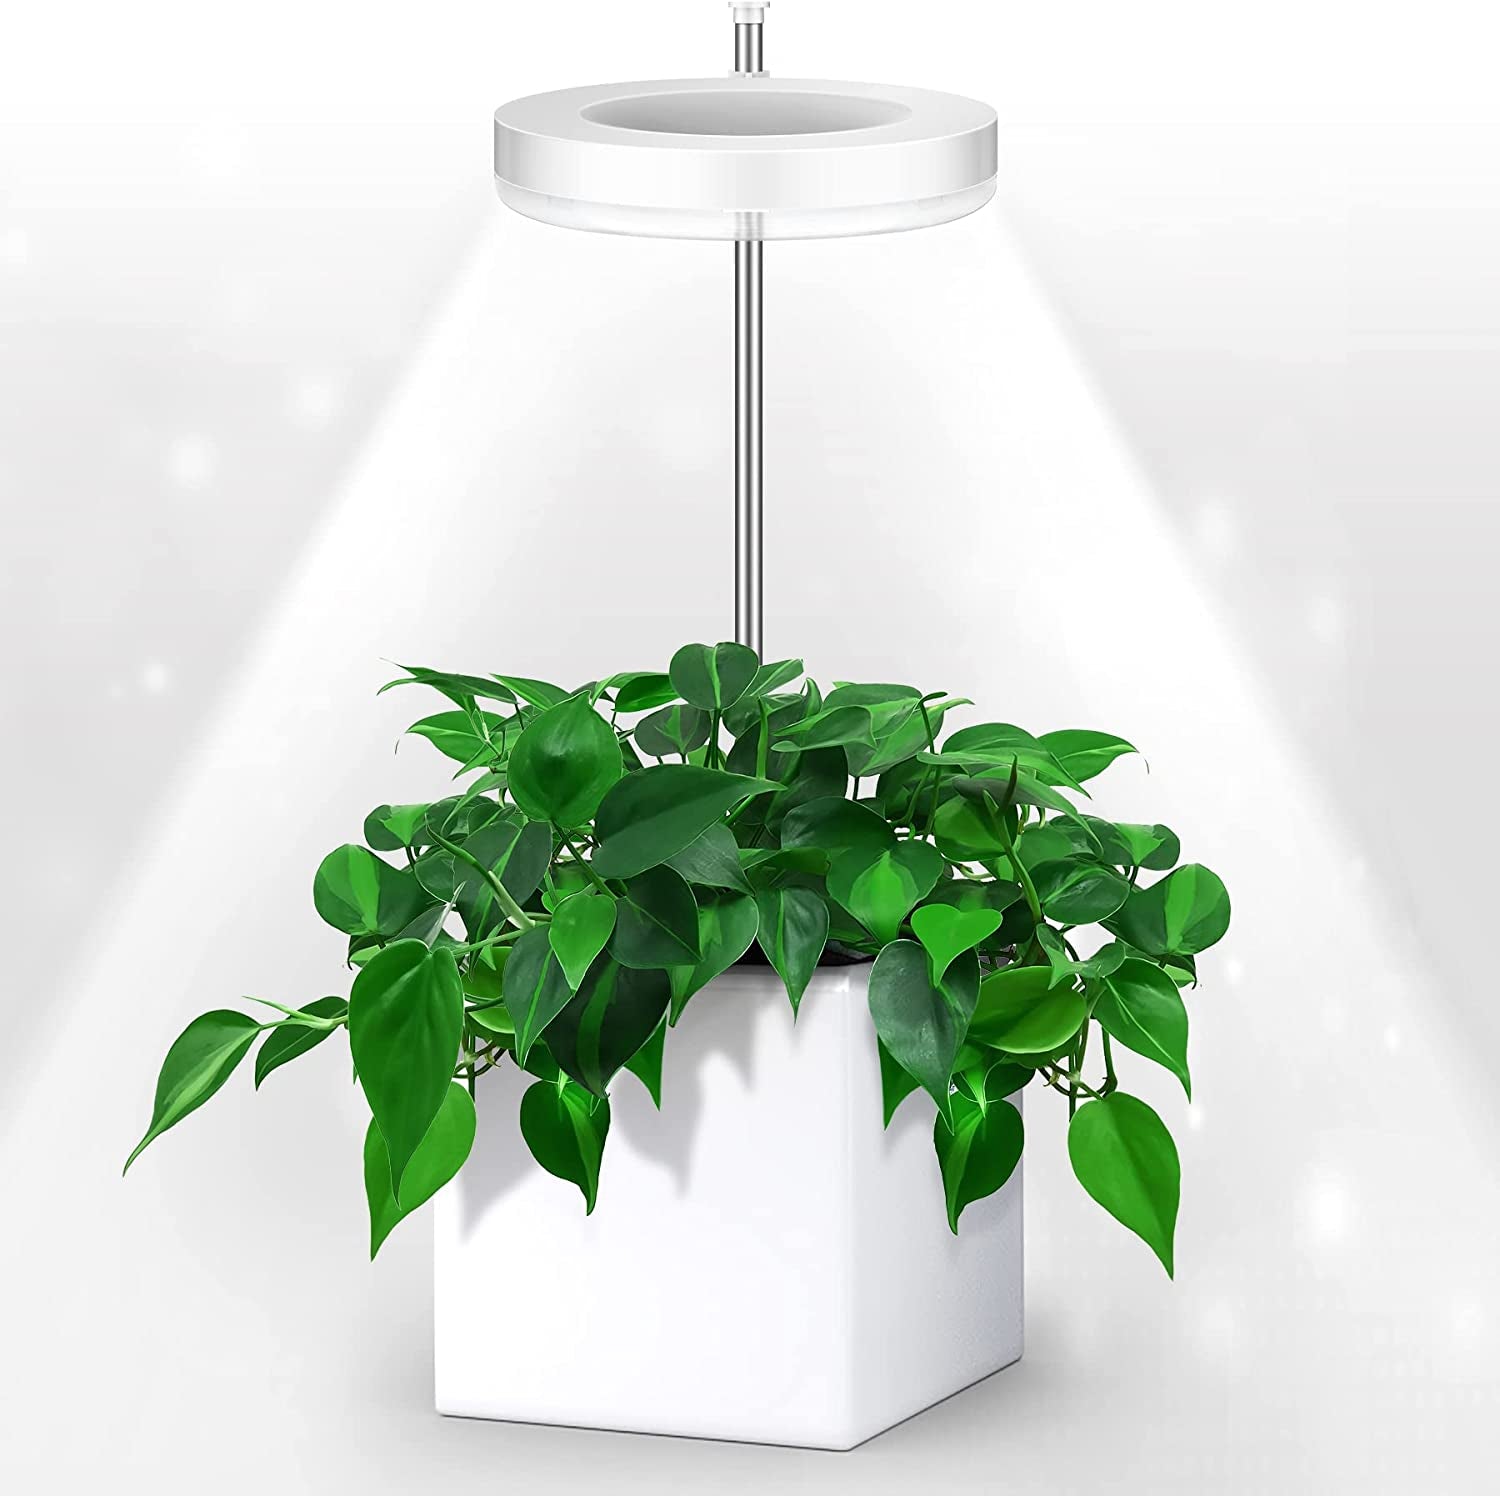 eWonLife, Grow Lights for Indoor Plants, Ewonlife Small Plant Lights Full Spectrum, LED Growing Lamp with Smart Timer, Height Adjustable, 3 Spectrum Modes with Warm White, Blue, Red, for House Growth